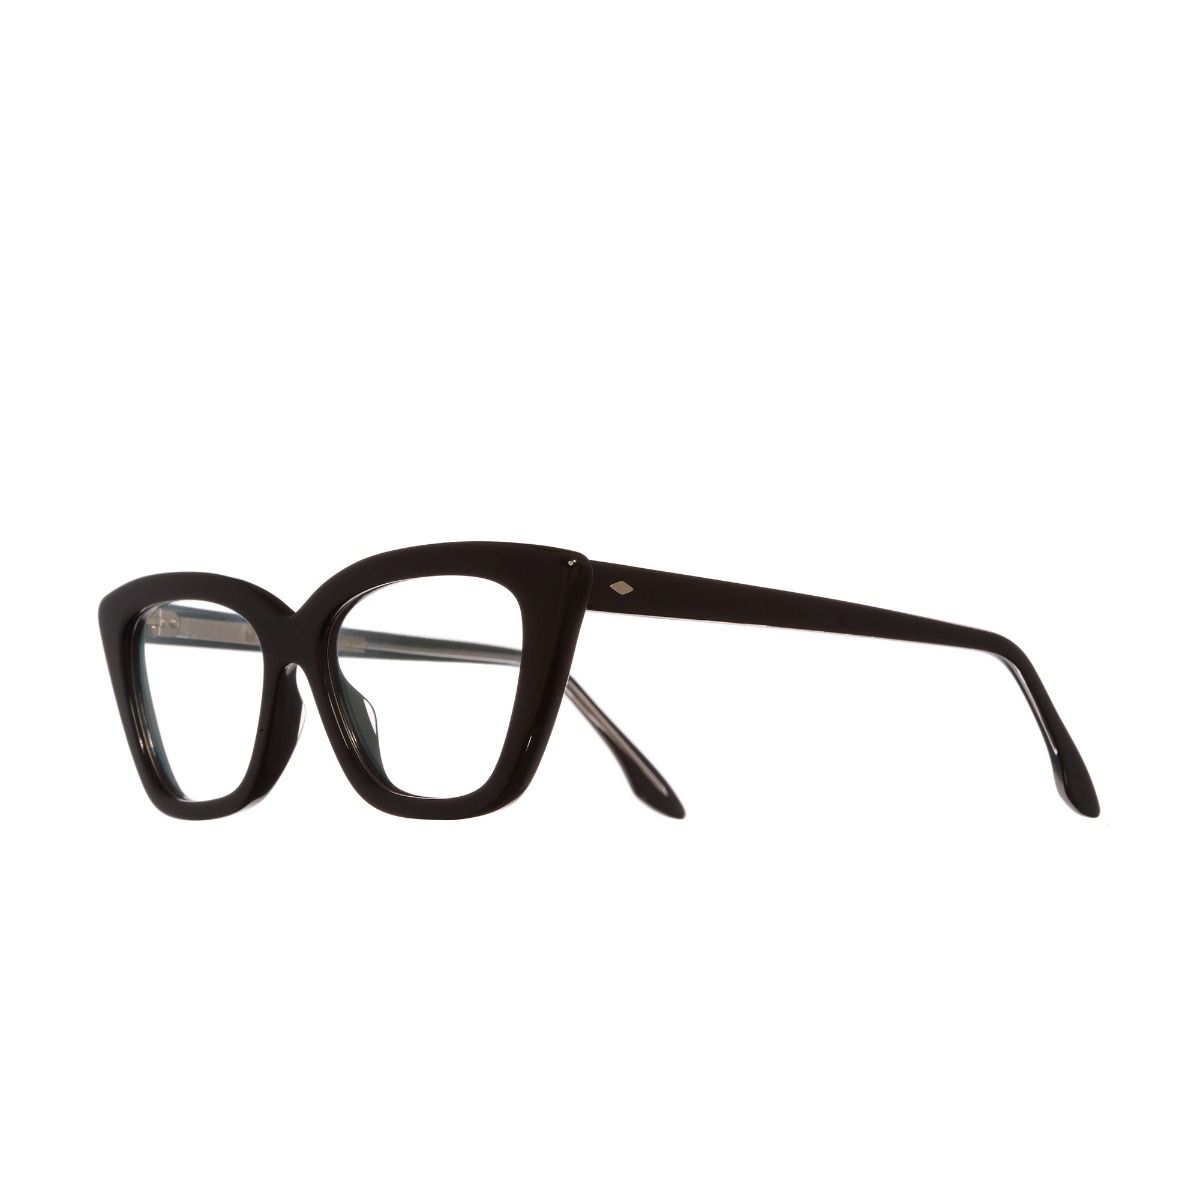 1241 Optical Cat-Eye Glasses - Black by Cutler and Gross